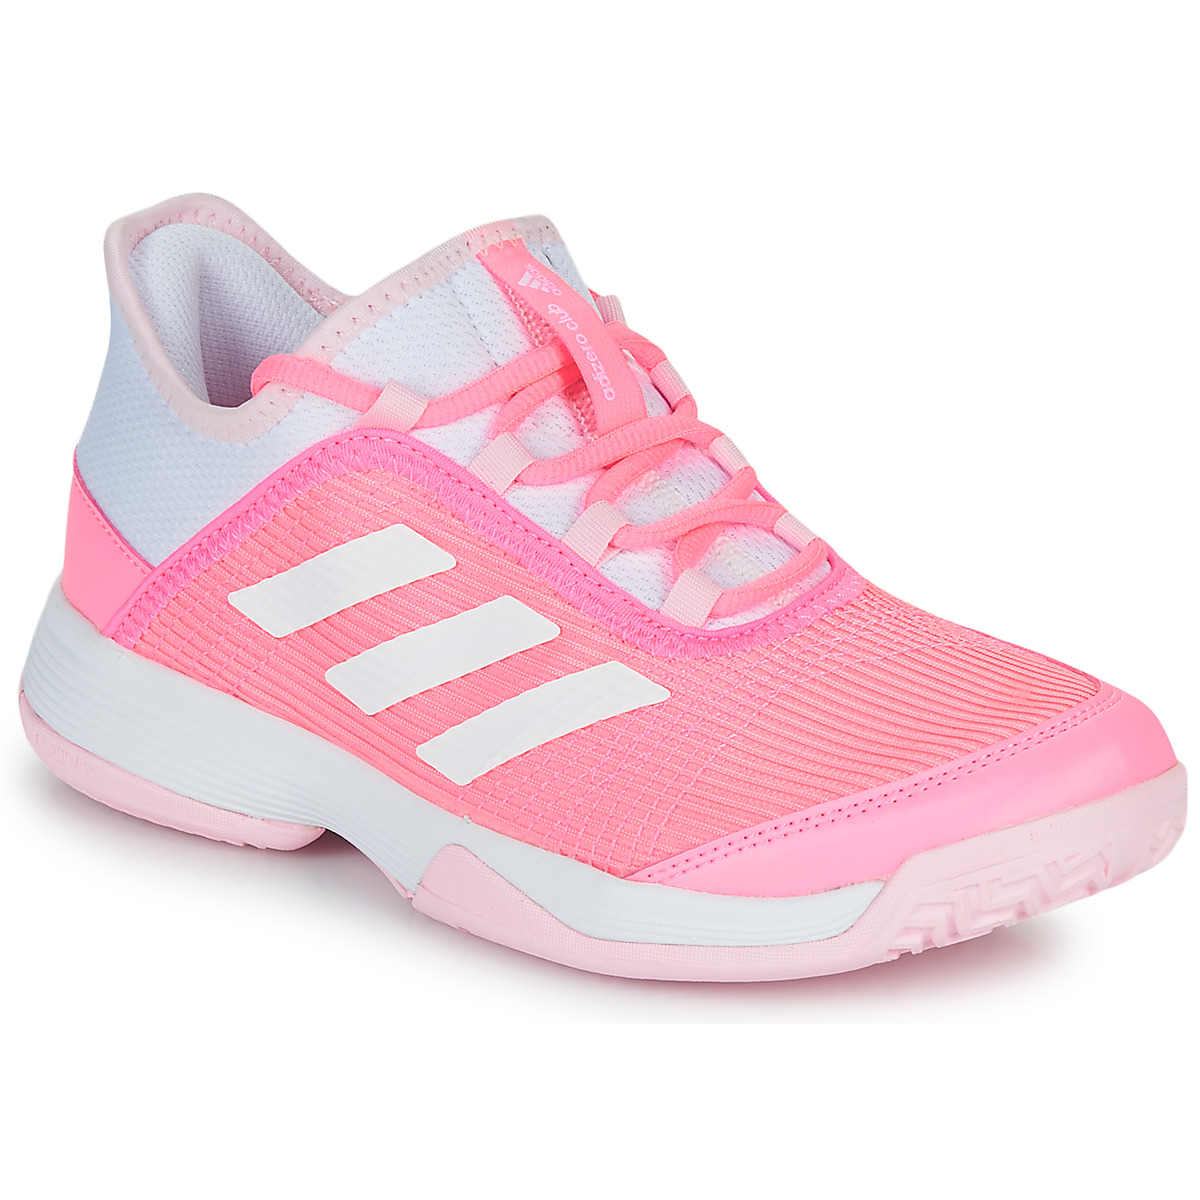 adidas Performance adizero club k Pink / White - Free delivery | Spartoo  NET ! - Shoes Tennis shoes Child USD/$